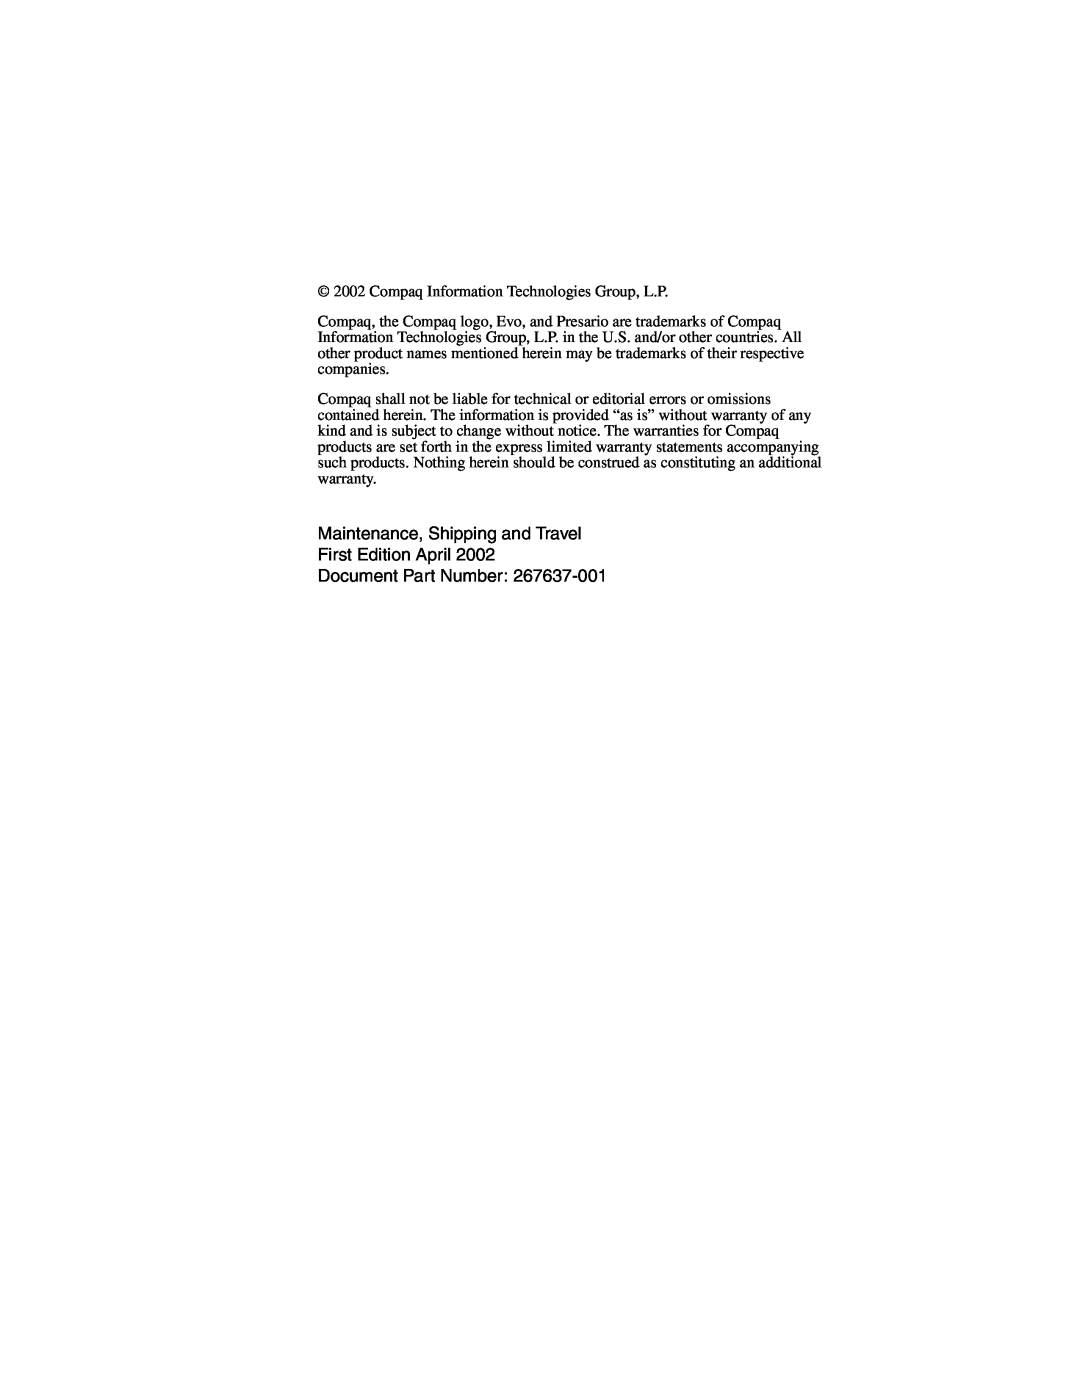 Compaq 267637-001 manual Maintenance, Shipping and Travel First Edition April, Document Part Number 